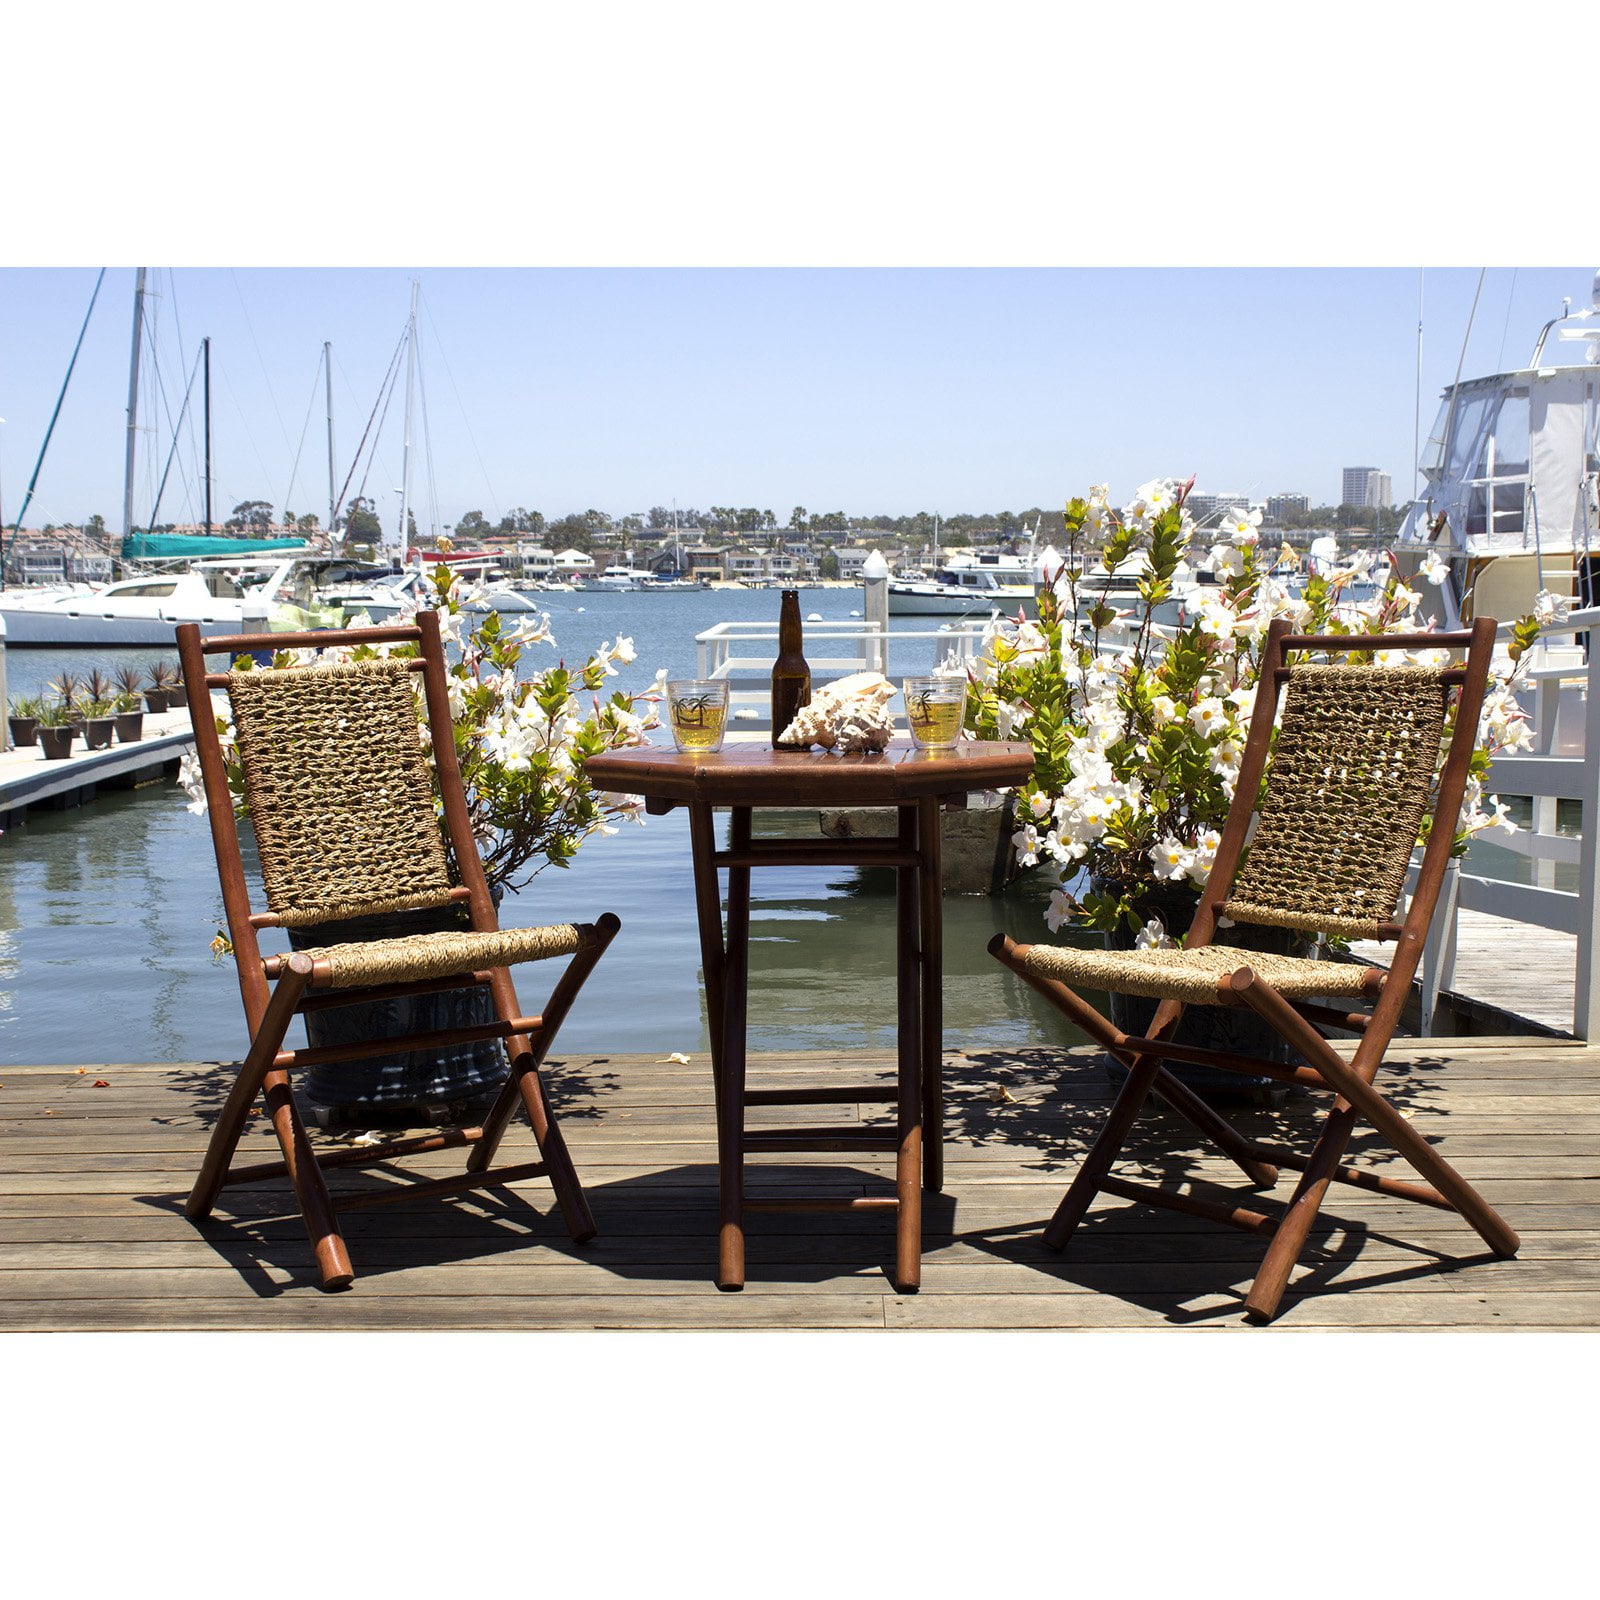 Heather Ann Creations The Maui Collection Contemporary Style Bamboo Wooden 3-Piece Table and Chairs Outdoor Patio Bistro Dining Set Natural 